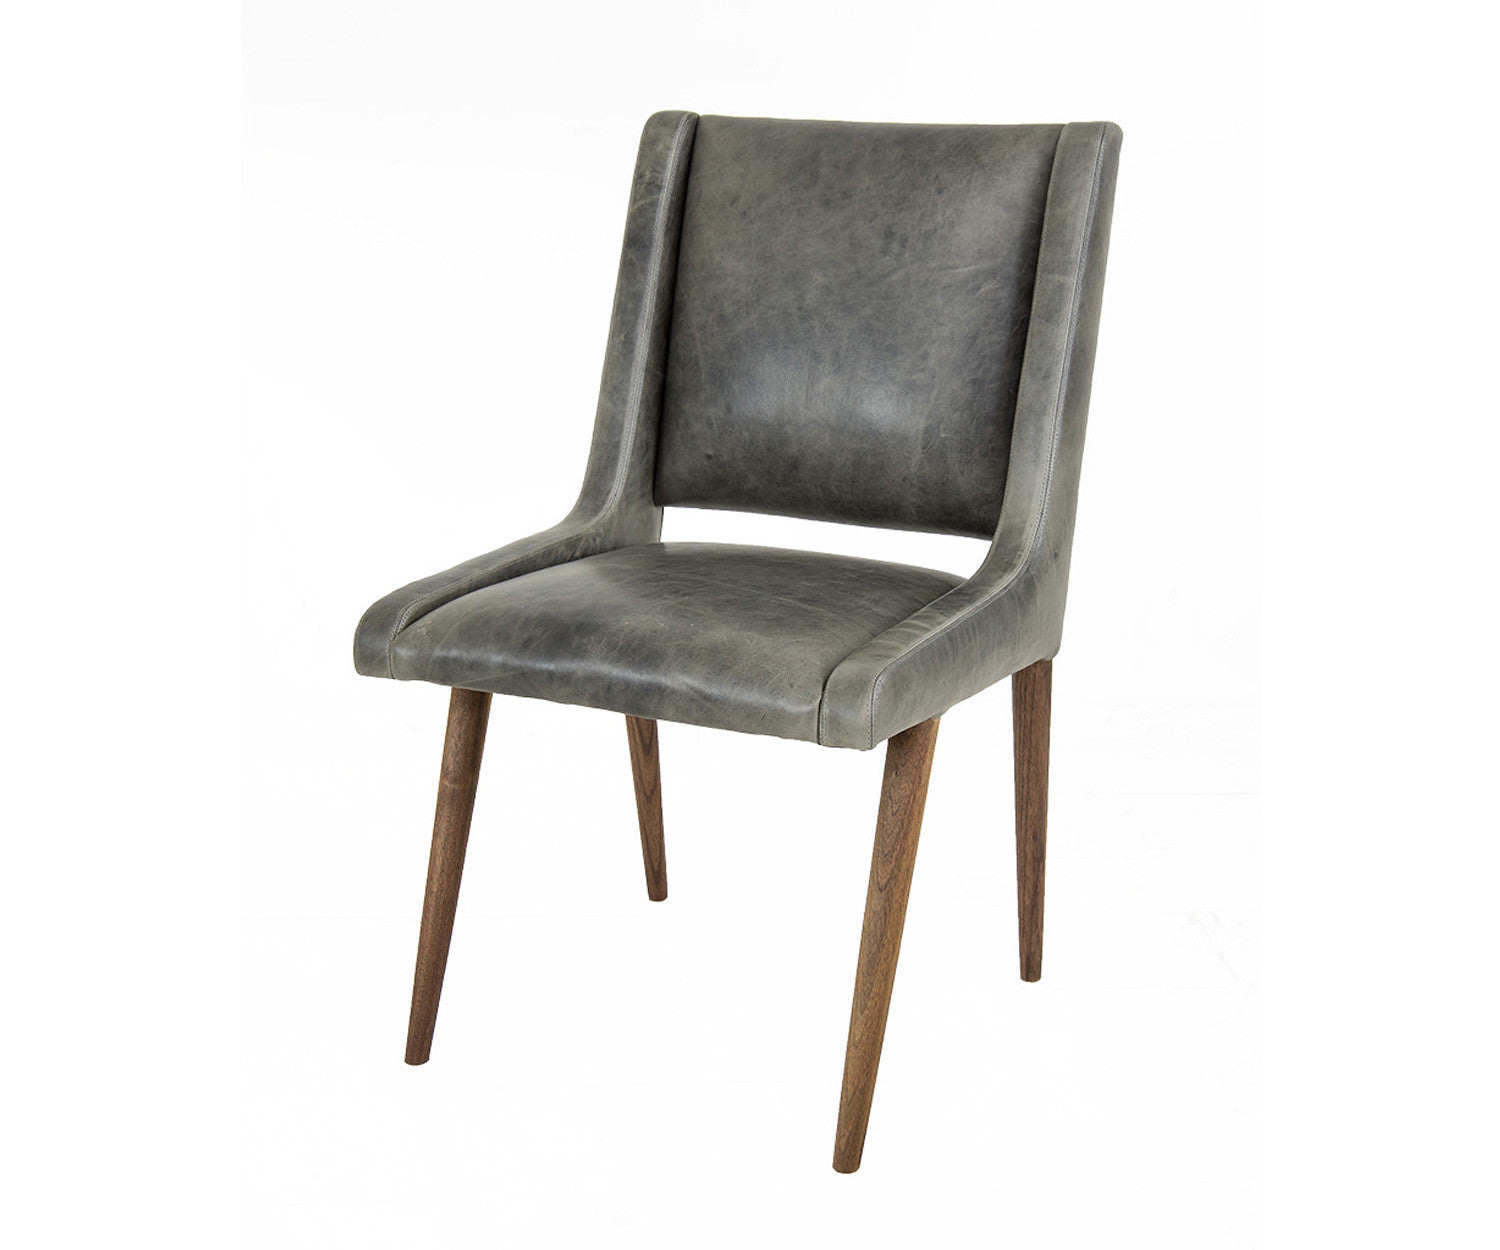 Mid Century Dining Chair in Distressed Grey Leather - ModShop